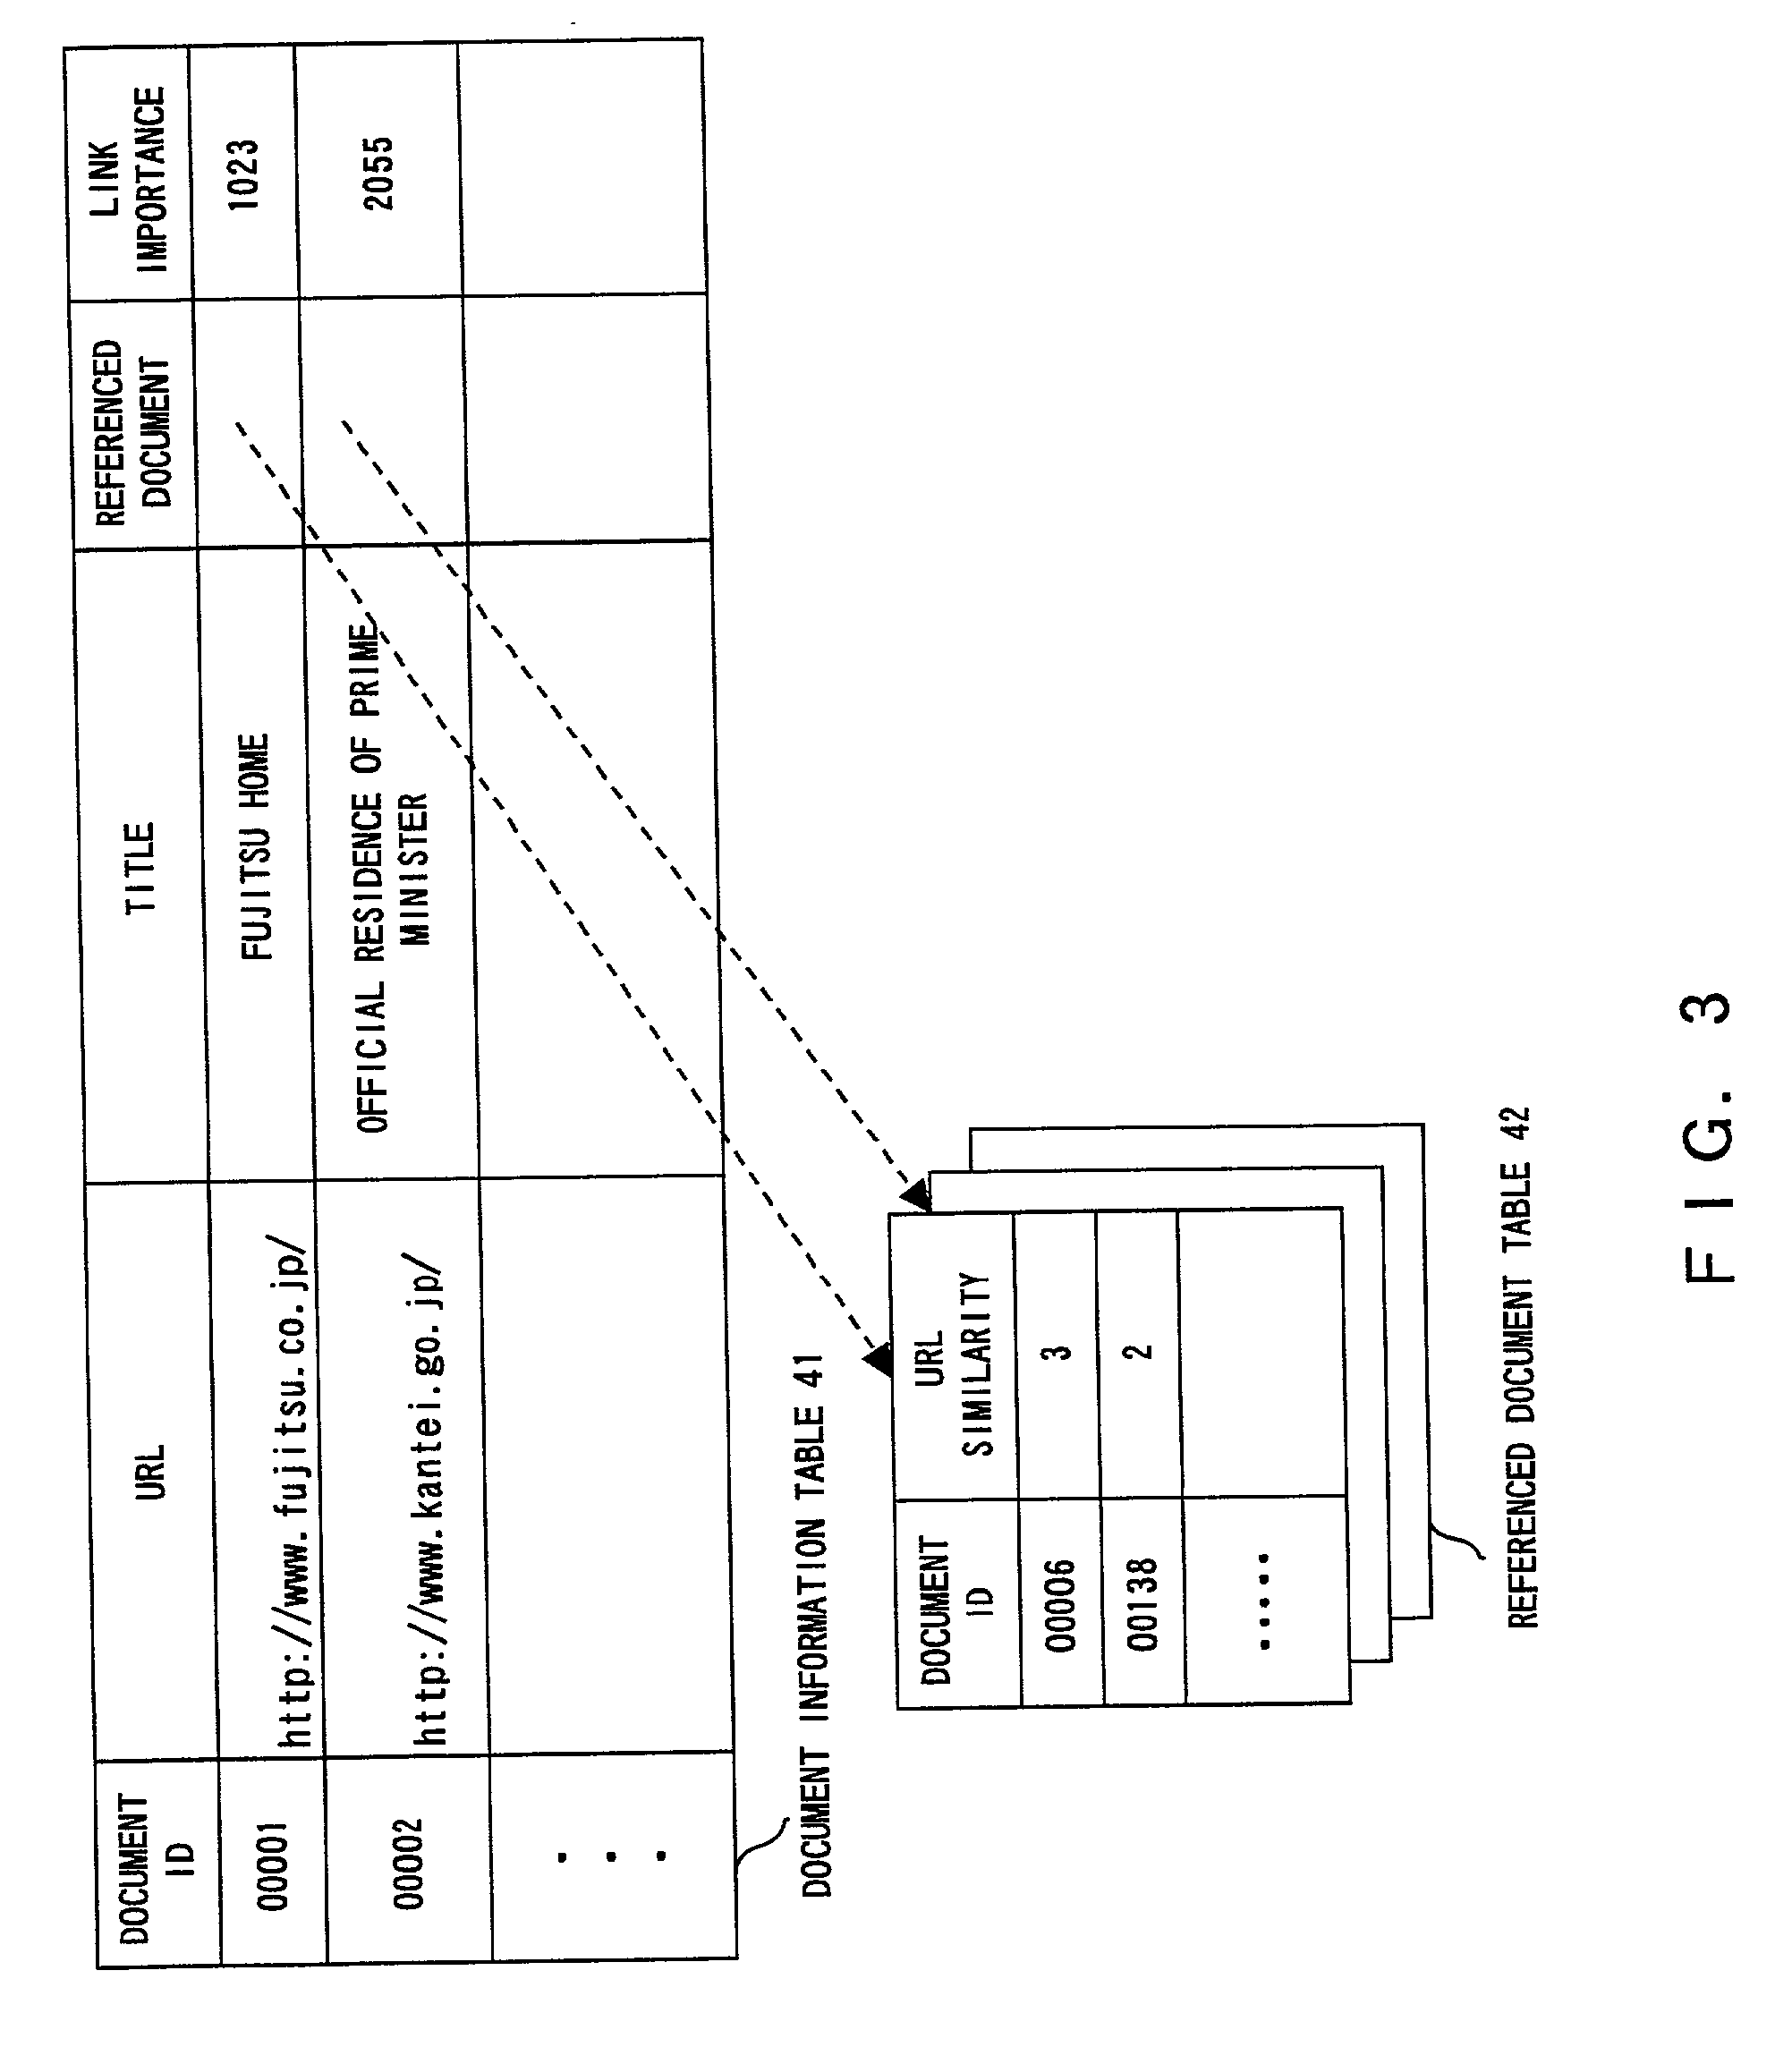 Document searching apparatus, method thereof, and record medium thereof